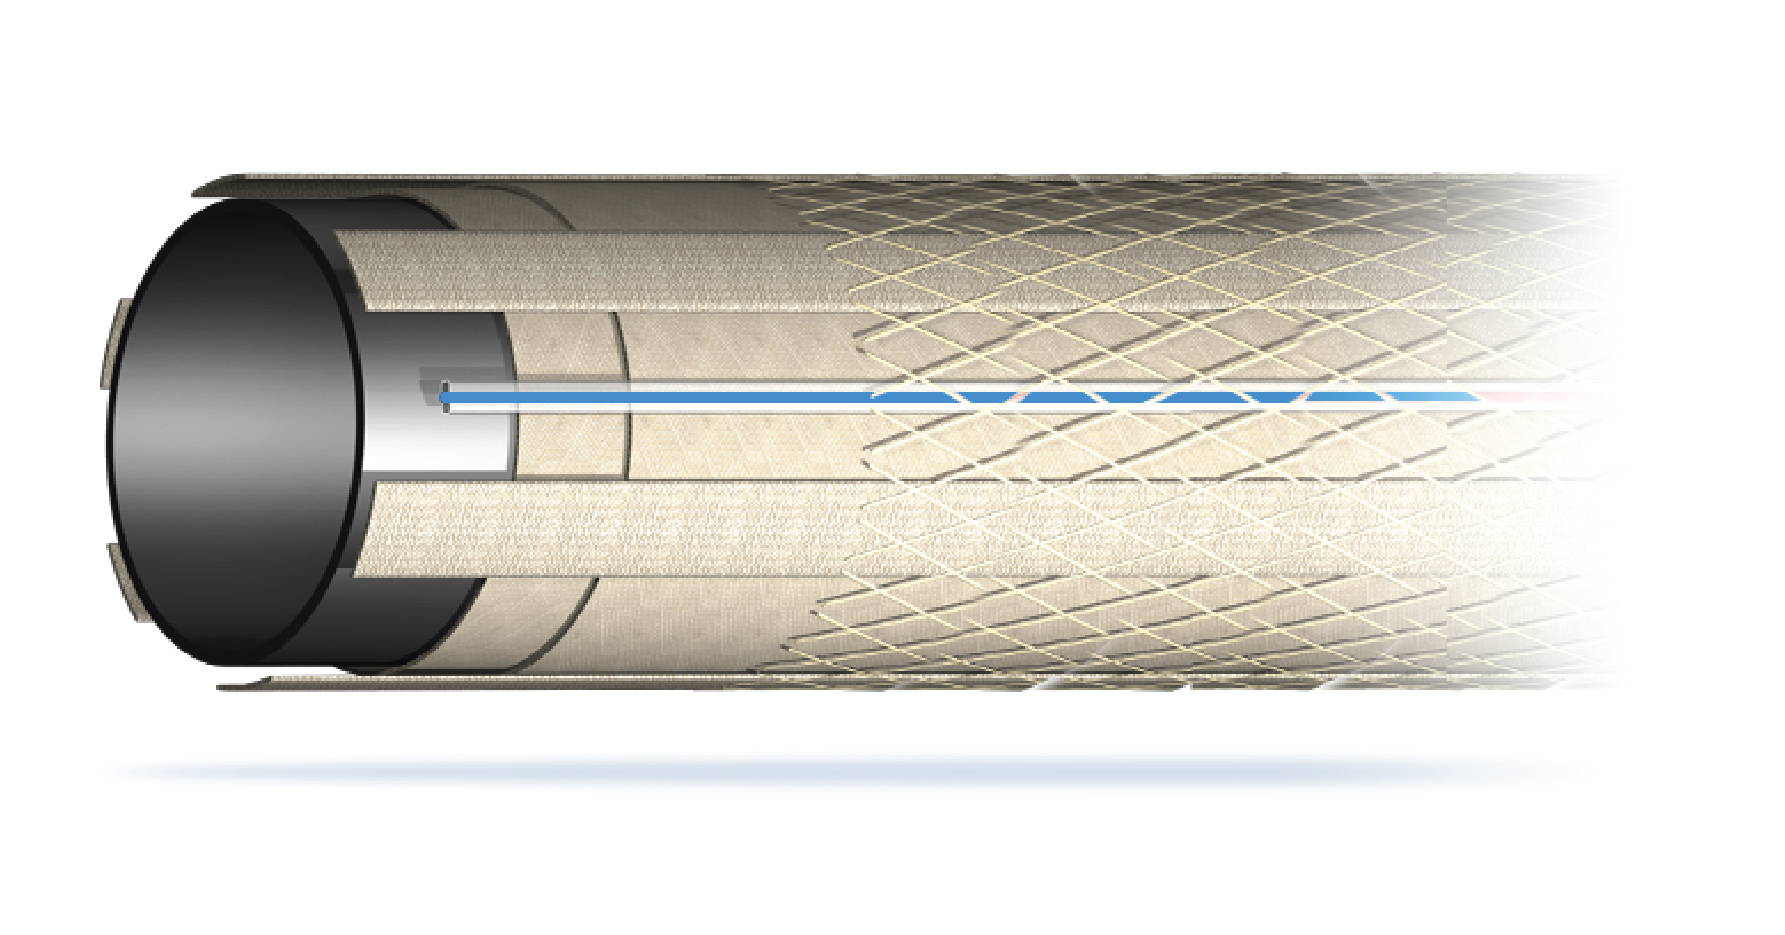 Rendering of Smartpipe flexible pipe product